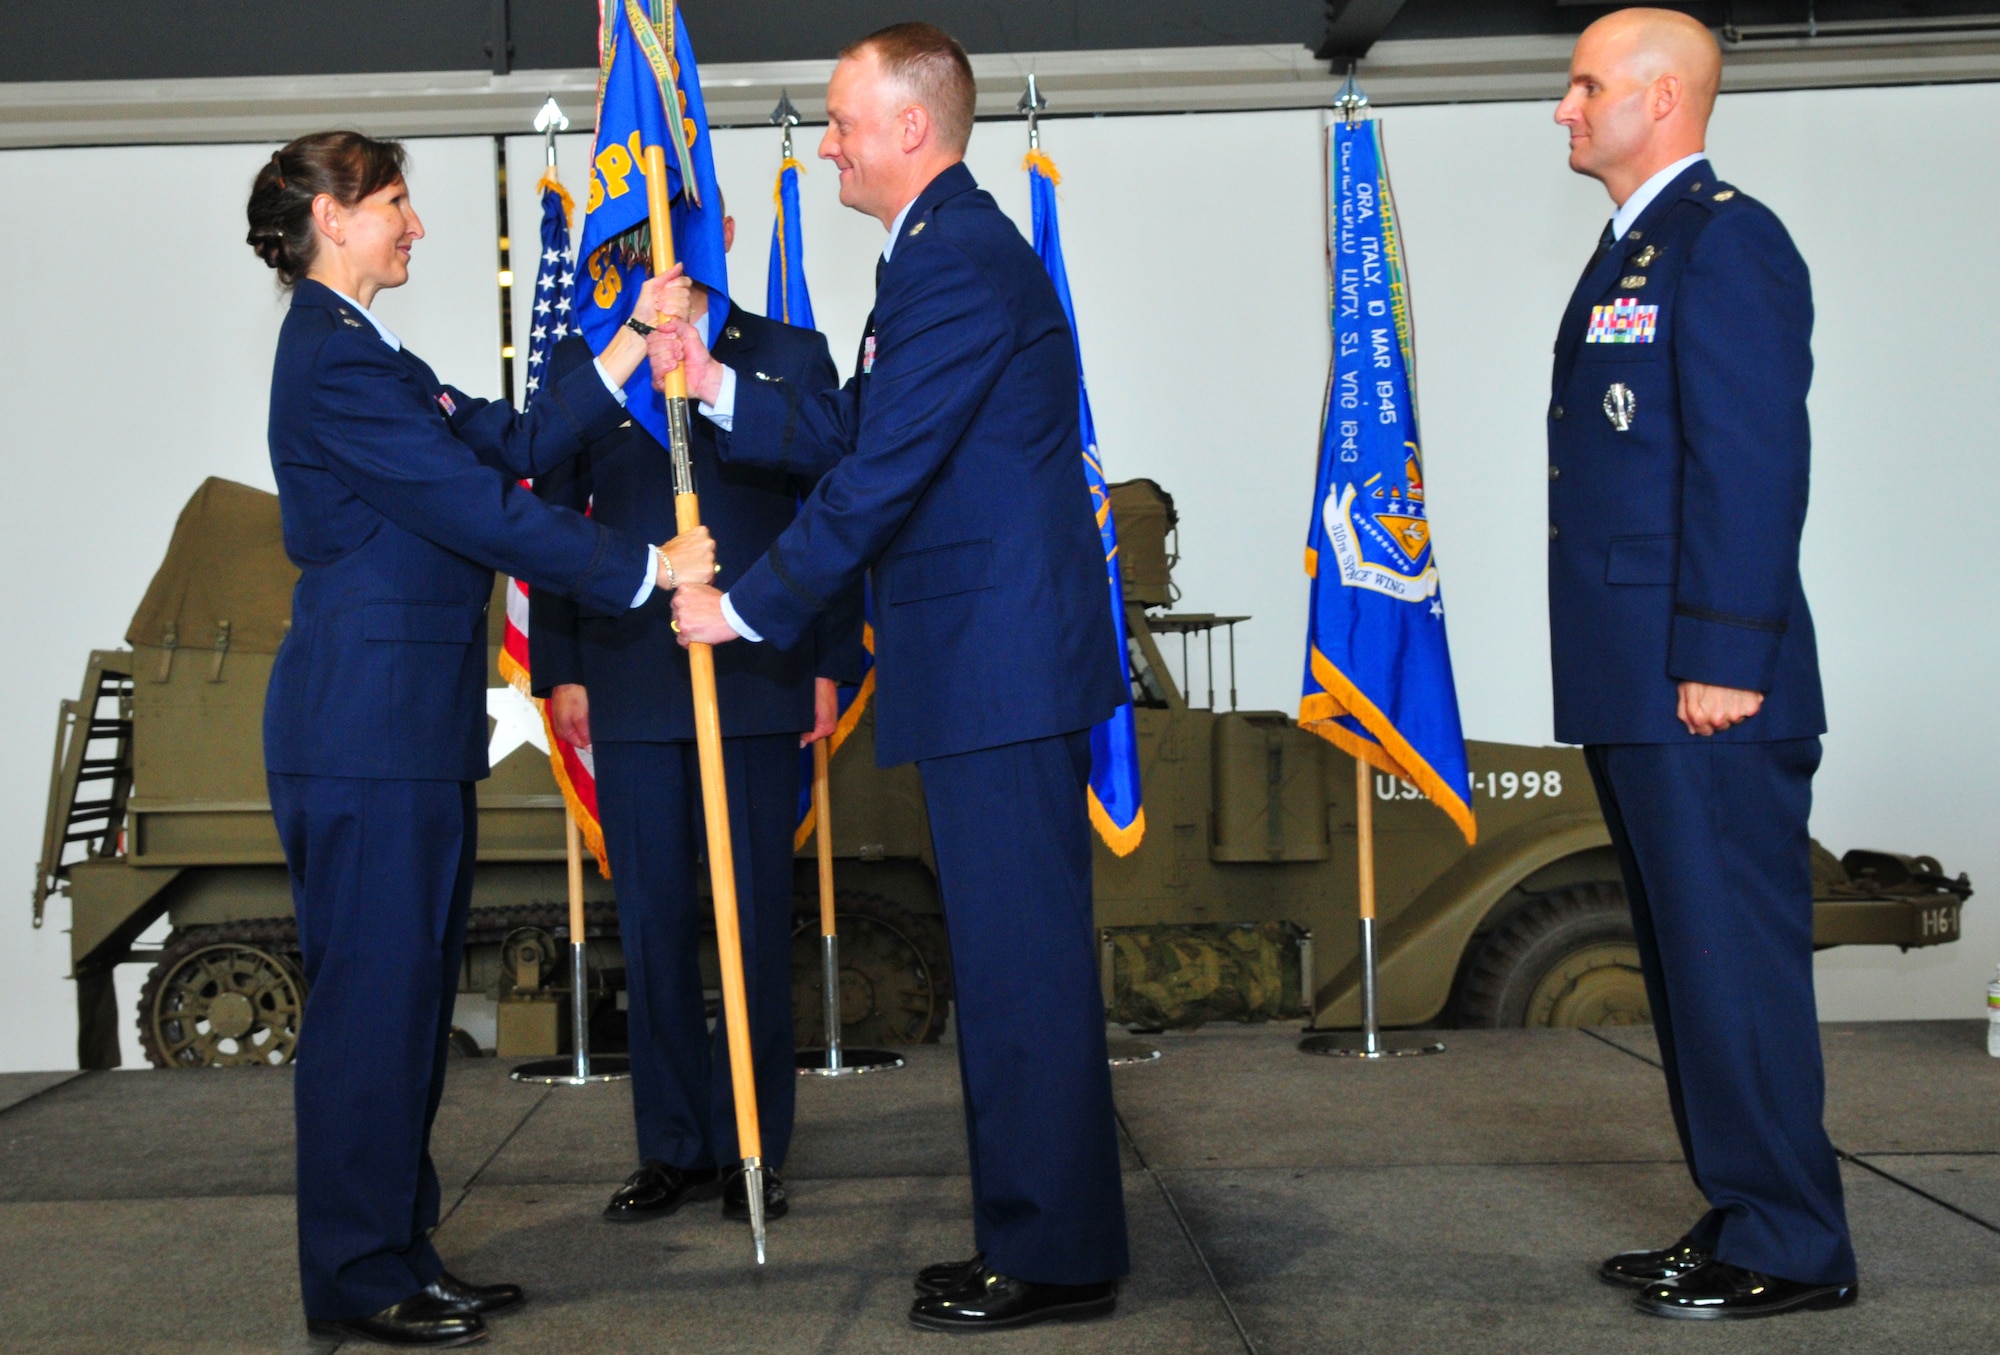 Lt. Col. Robert Claude accepts command of the 380th Space Control Squadron from Lt. Col. Traci Kueker-Murpy, commander of the 310th Operations Group, at the West Pac Restorations Hangar One in Colorado Springs, Colo., July 10. (U.S. Air Force photo by Tech. Sgt. Nick Ontiveros)